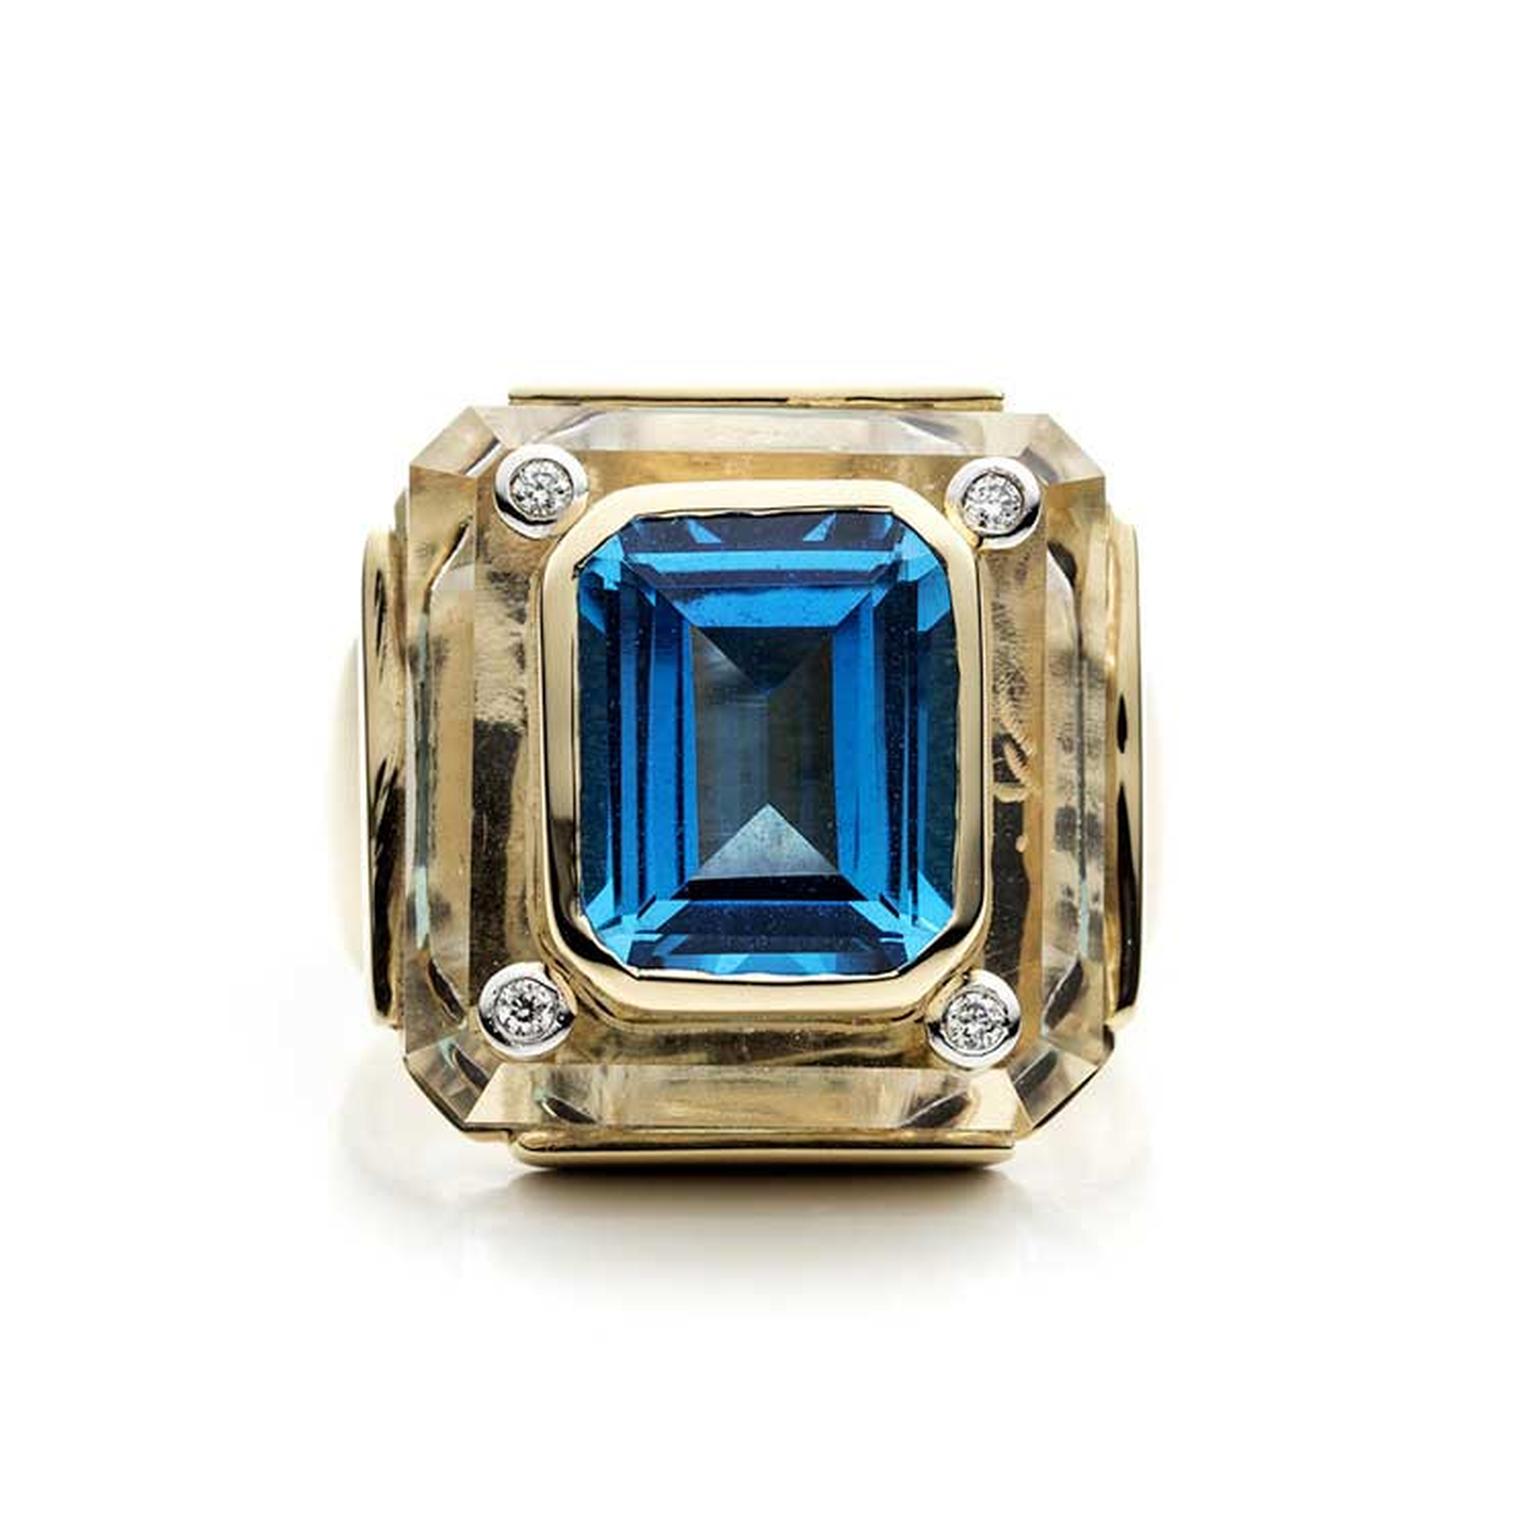 Kara Ross Cava ring in rock crystal with blue topaz front